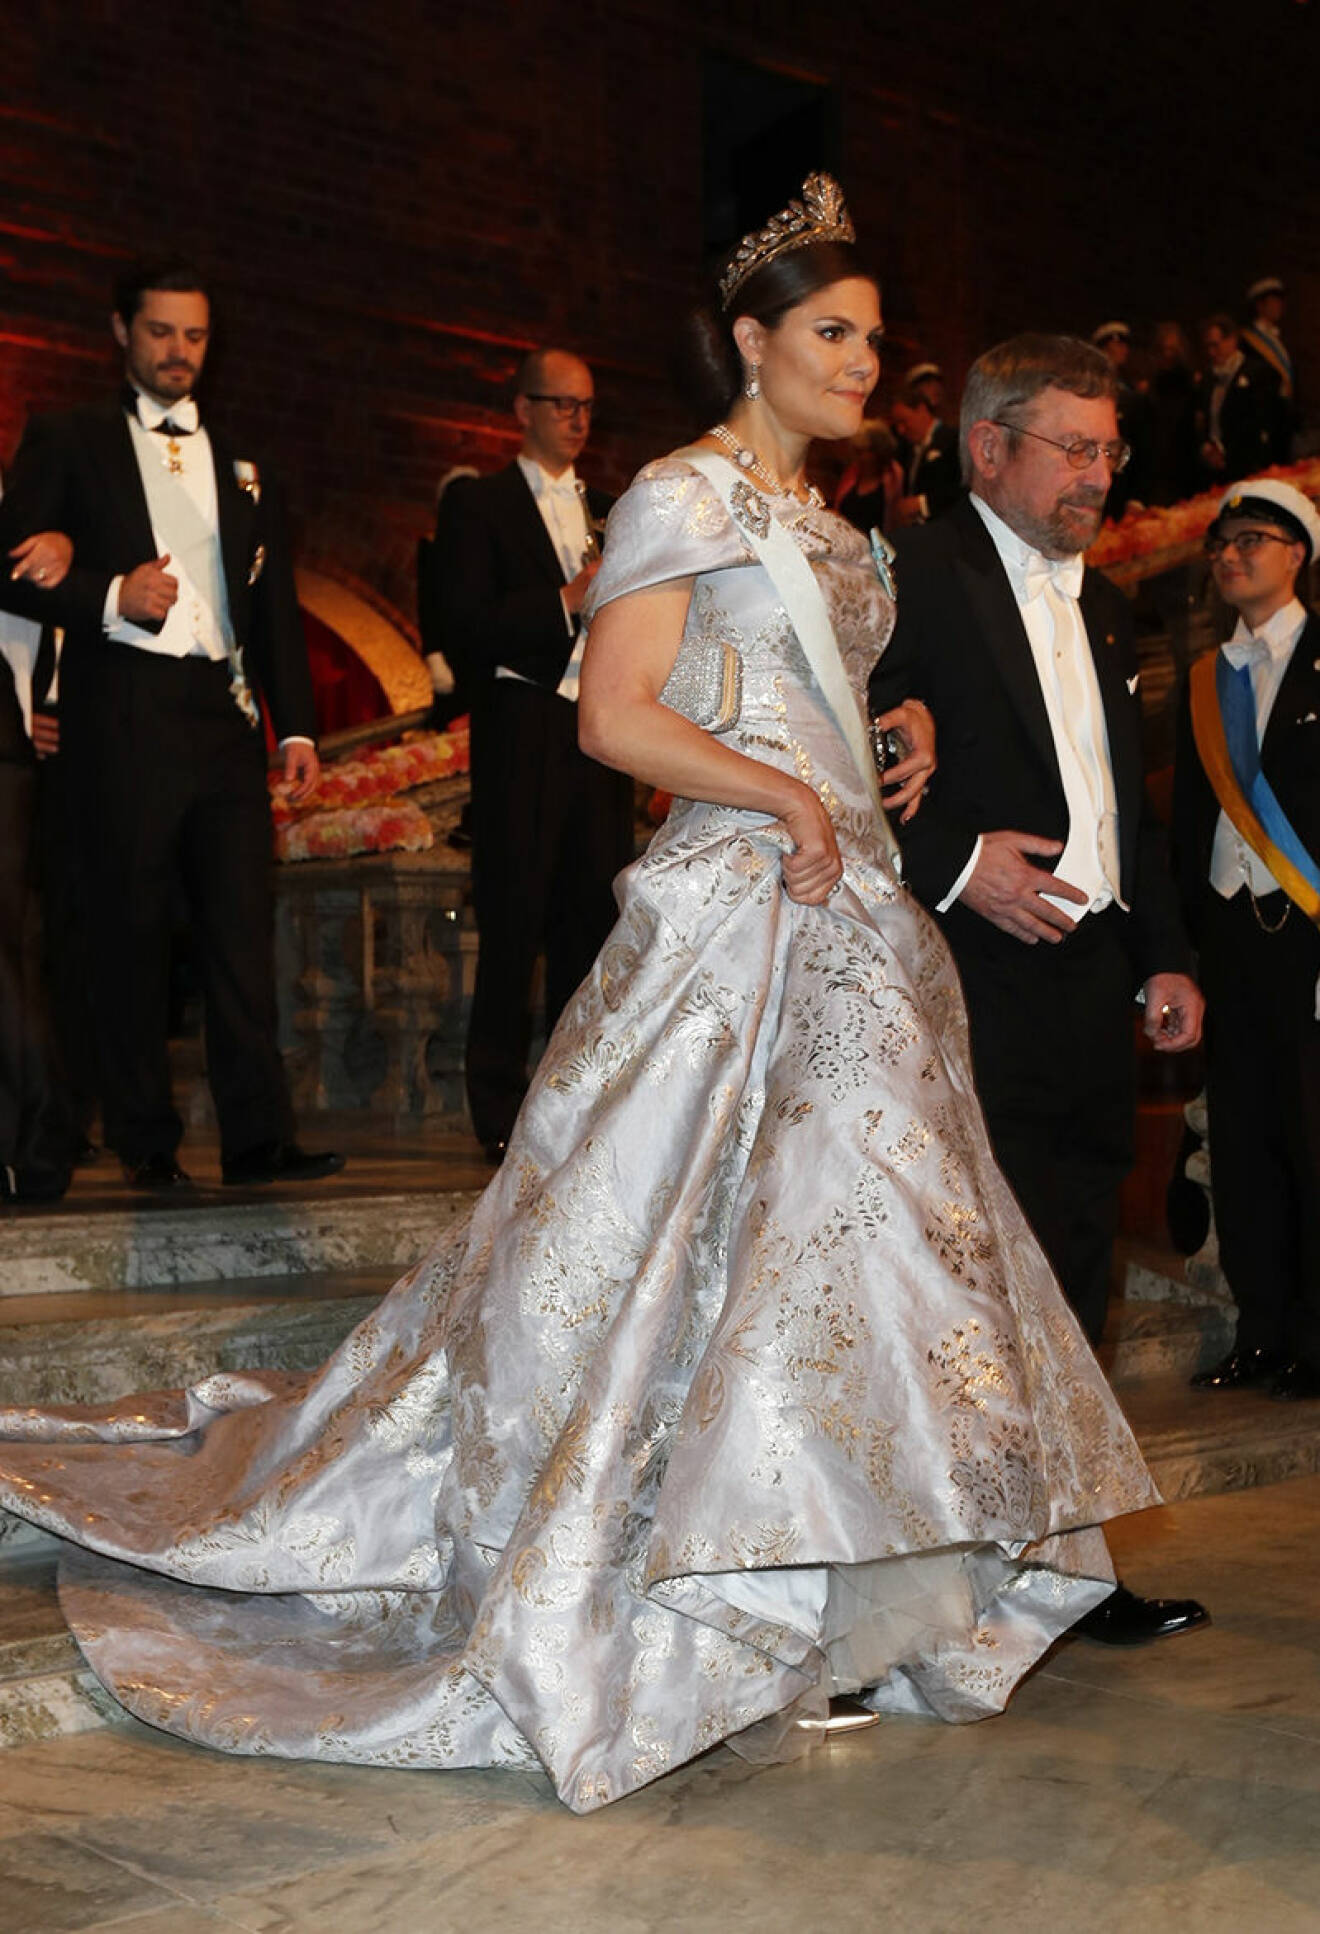 6849517 STOCKHOLM 2016-12-10. The Nobel Prize 2016. The Nobel Banquet held in the Blue Hall of the Stockholm City Hall. Picture shows: Crown Princess Victoria of Sweden. COPYRIGHT STELLA PICTURES